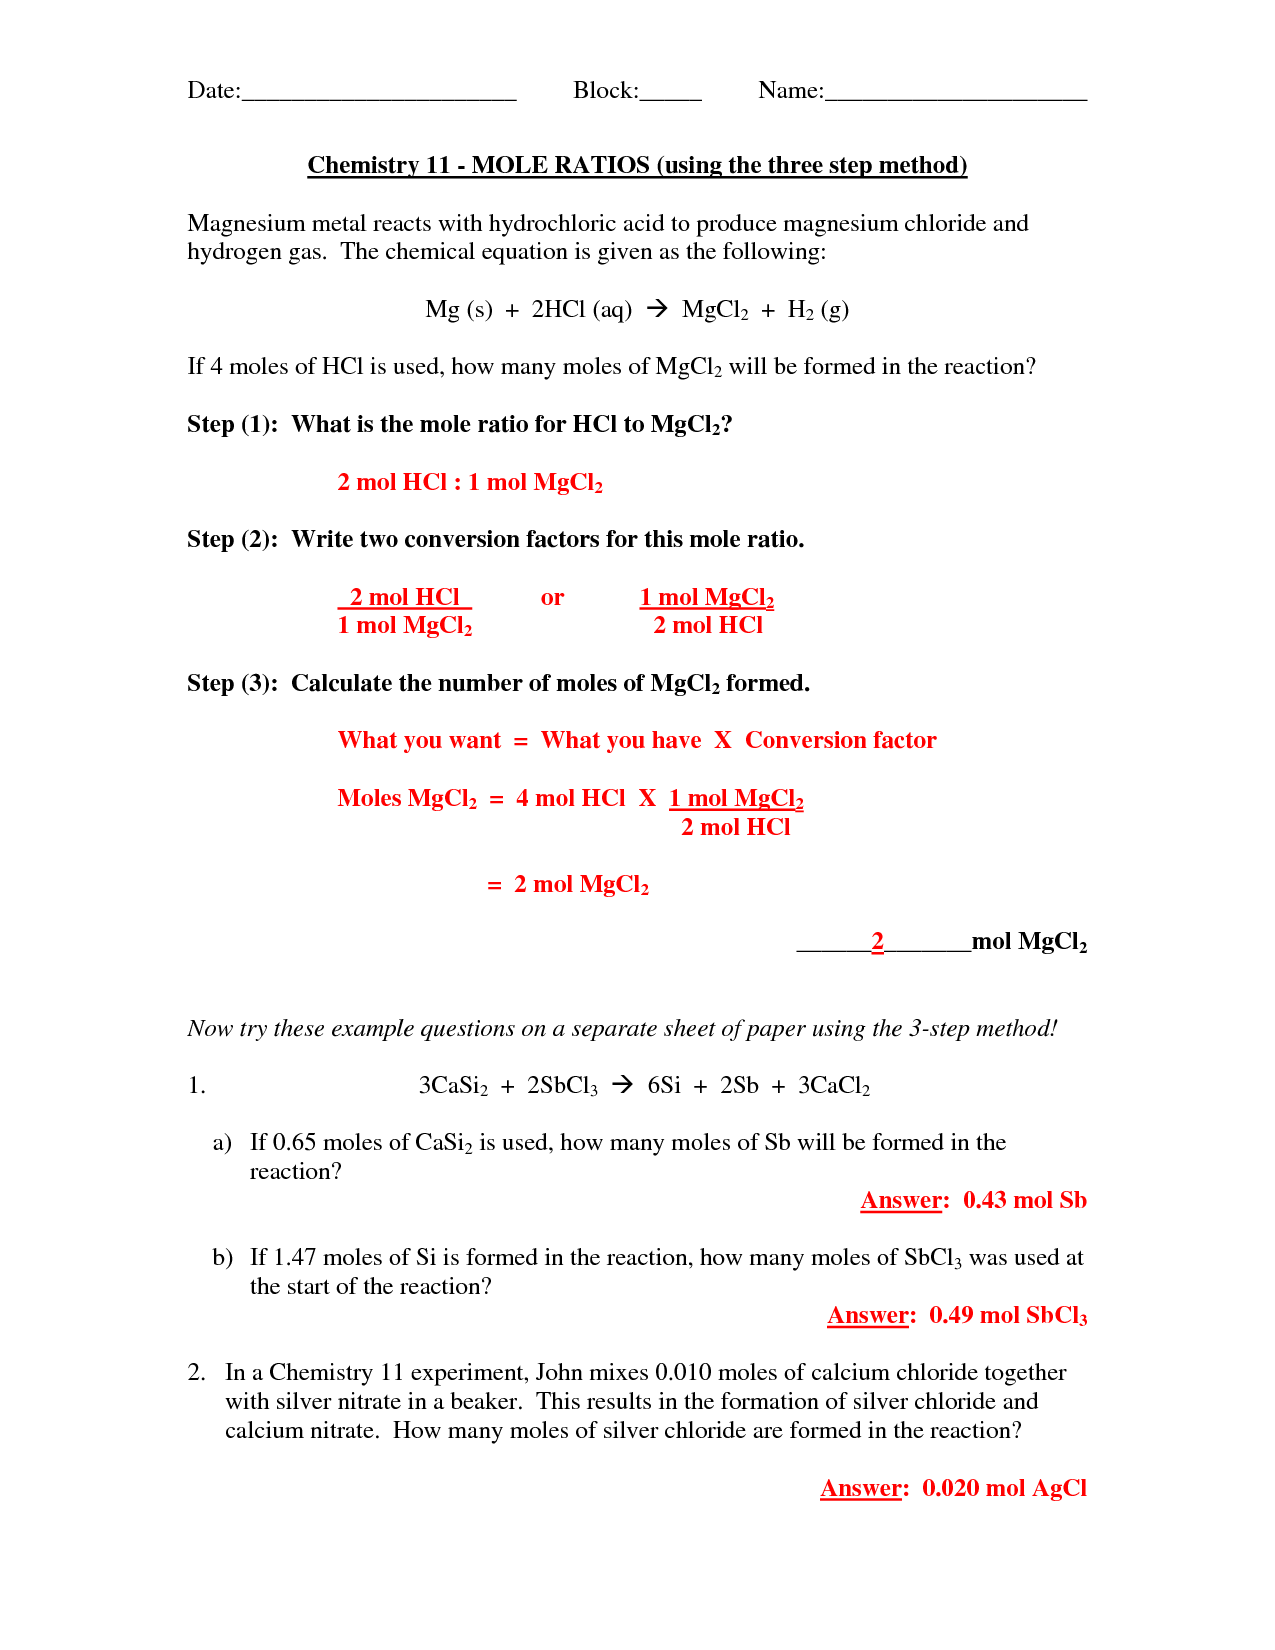 worksheet-mole-problems-answers-judithcahen-answer-key-for-practice-test